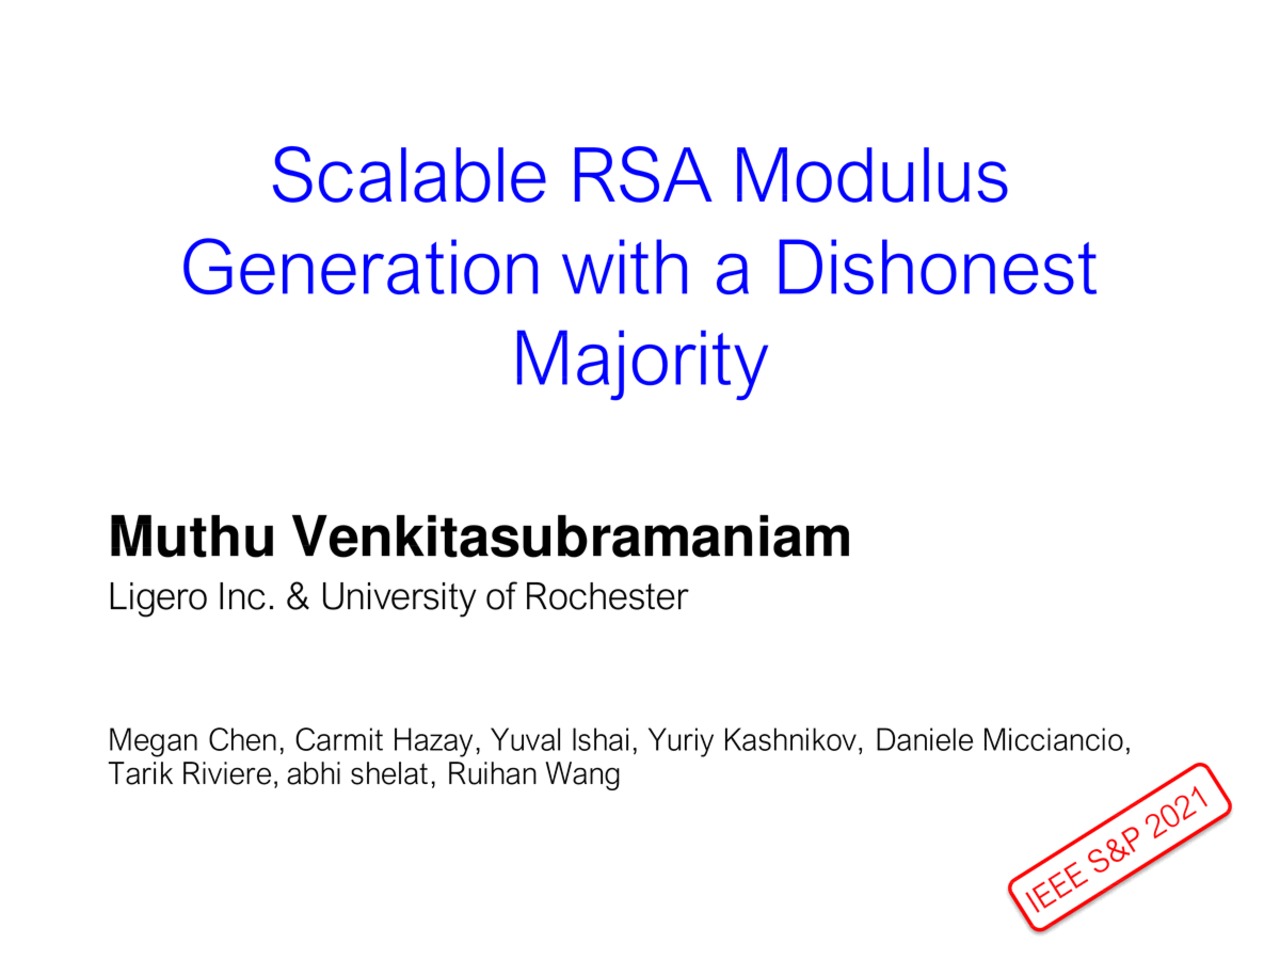 MPTS 2020 Talk 3b2: Scaling Distributed RSA Modulus Generation with a Dishonest Majority